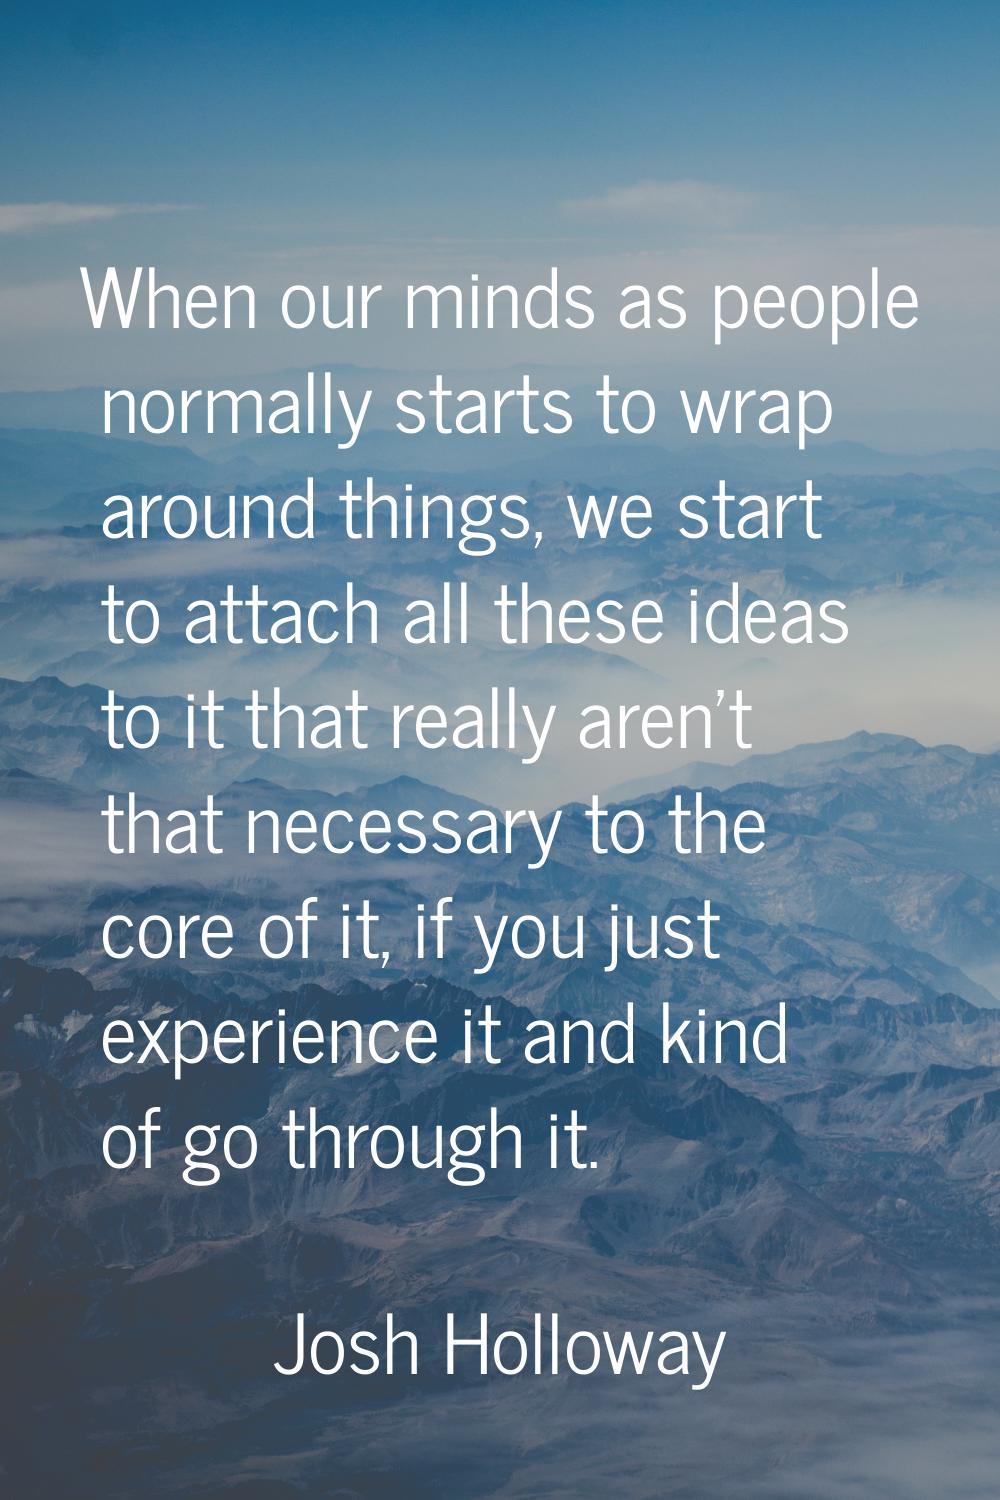 When our minds as people normally starts to wrap around things, we start to attach all these ideas 